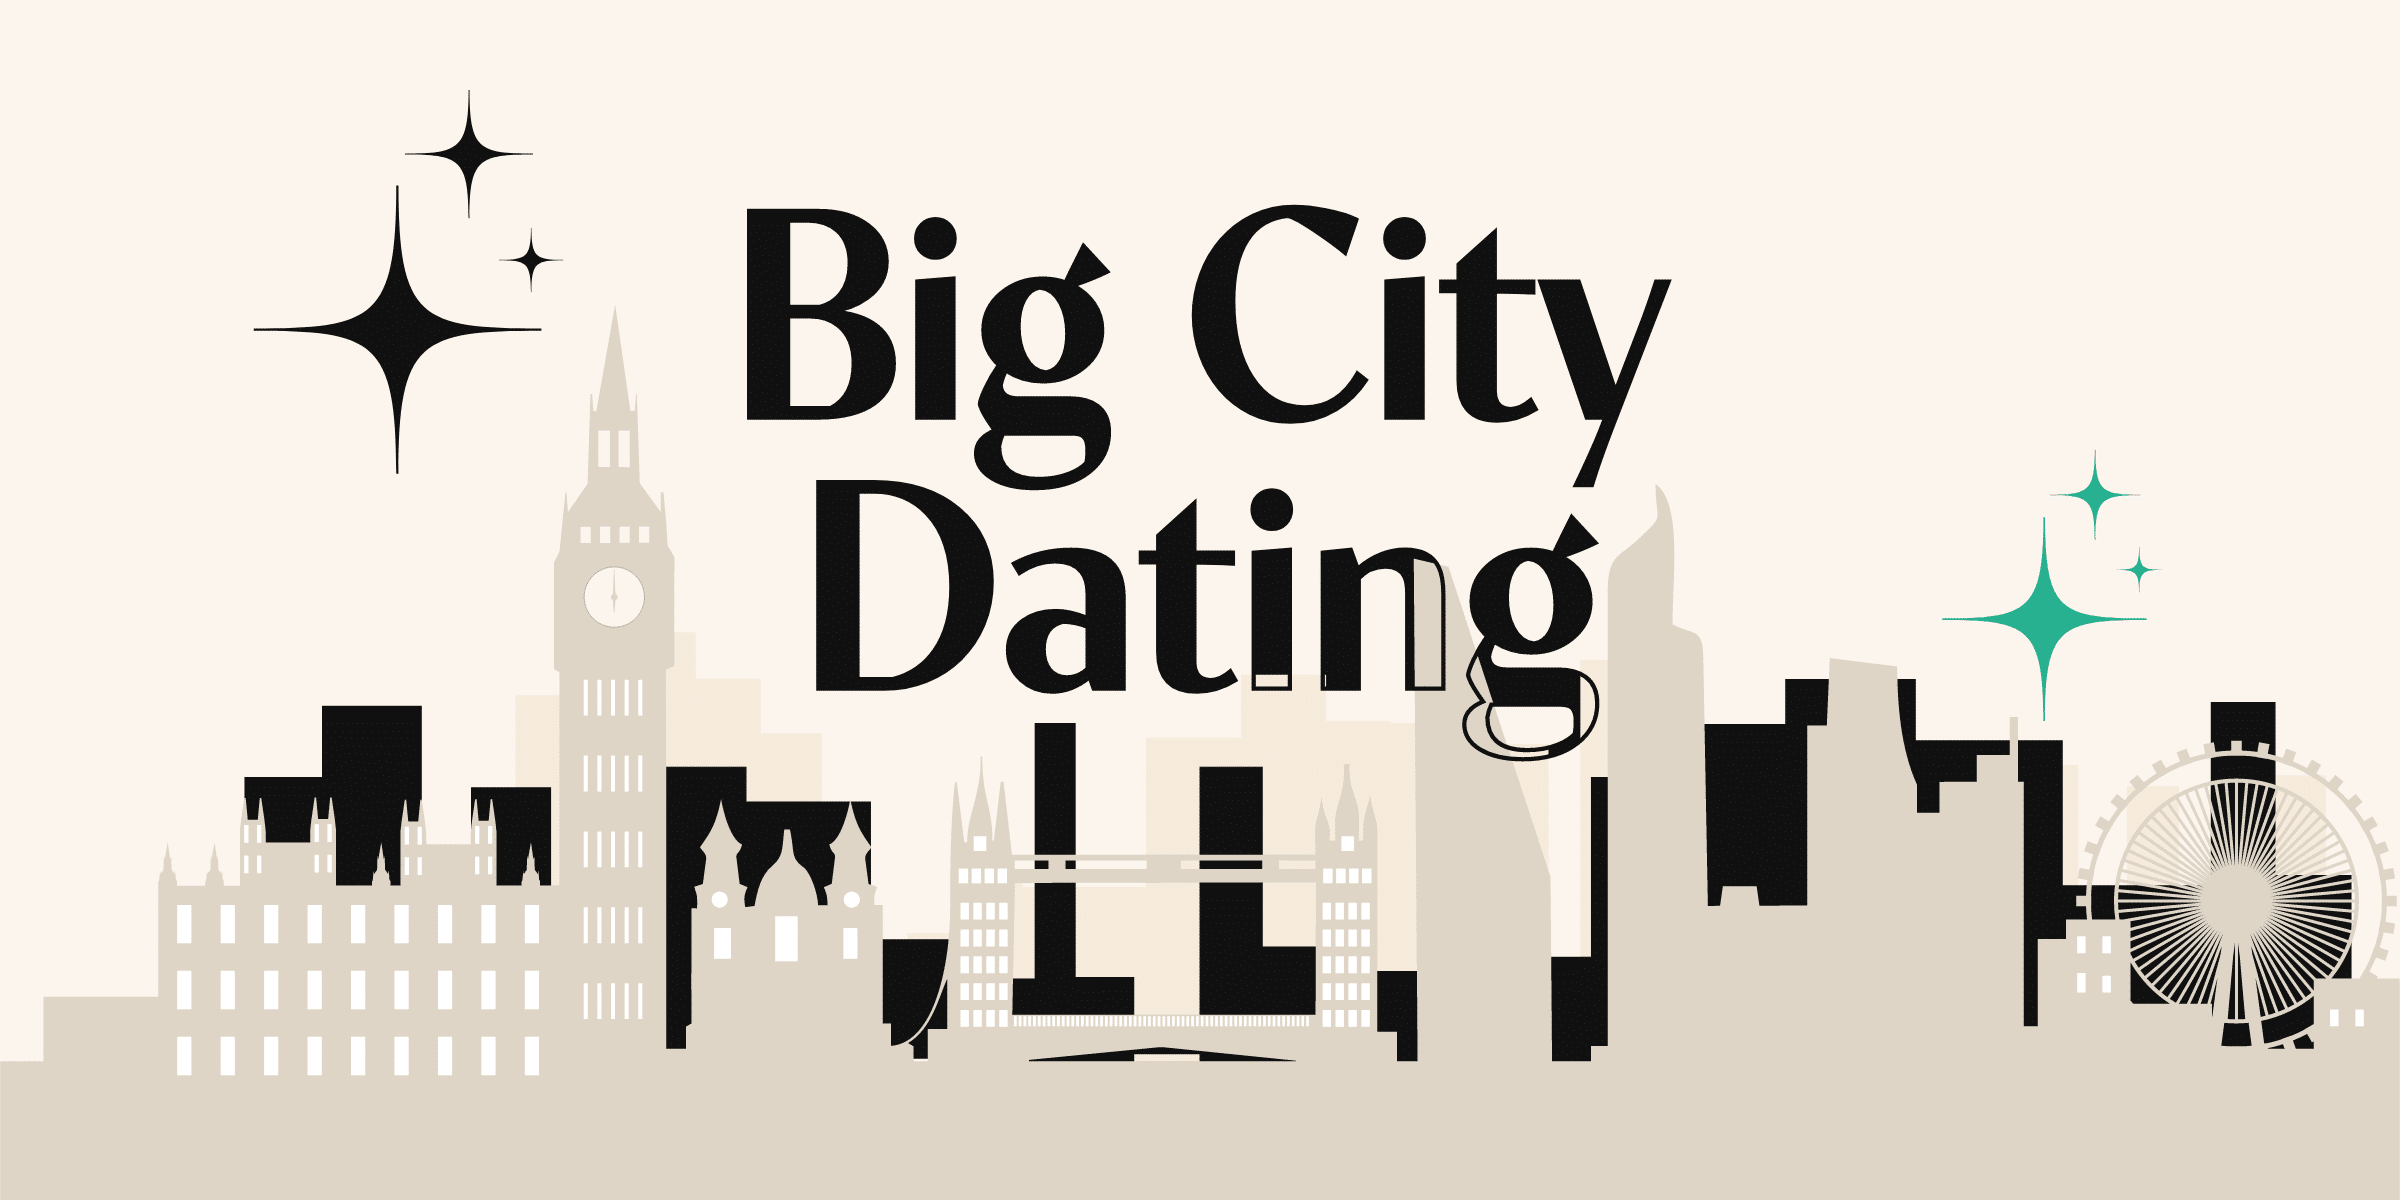 Dating in big cities like La La Land or NYC can be challenging, but we’re here to help. Our big-city dating guide offers expert advice so you can find your perfect match.